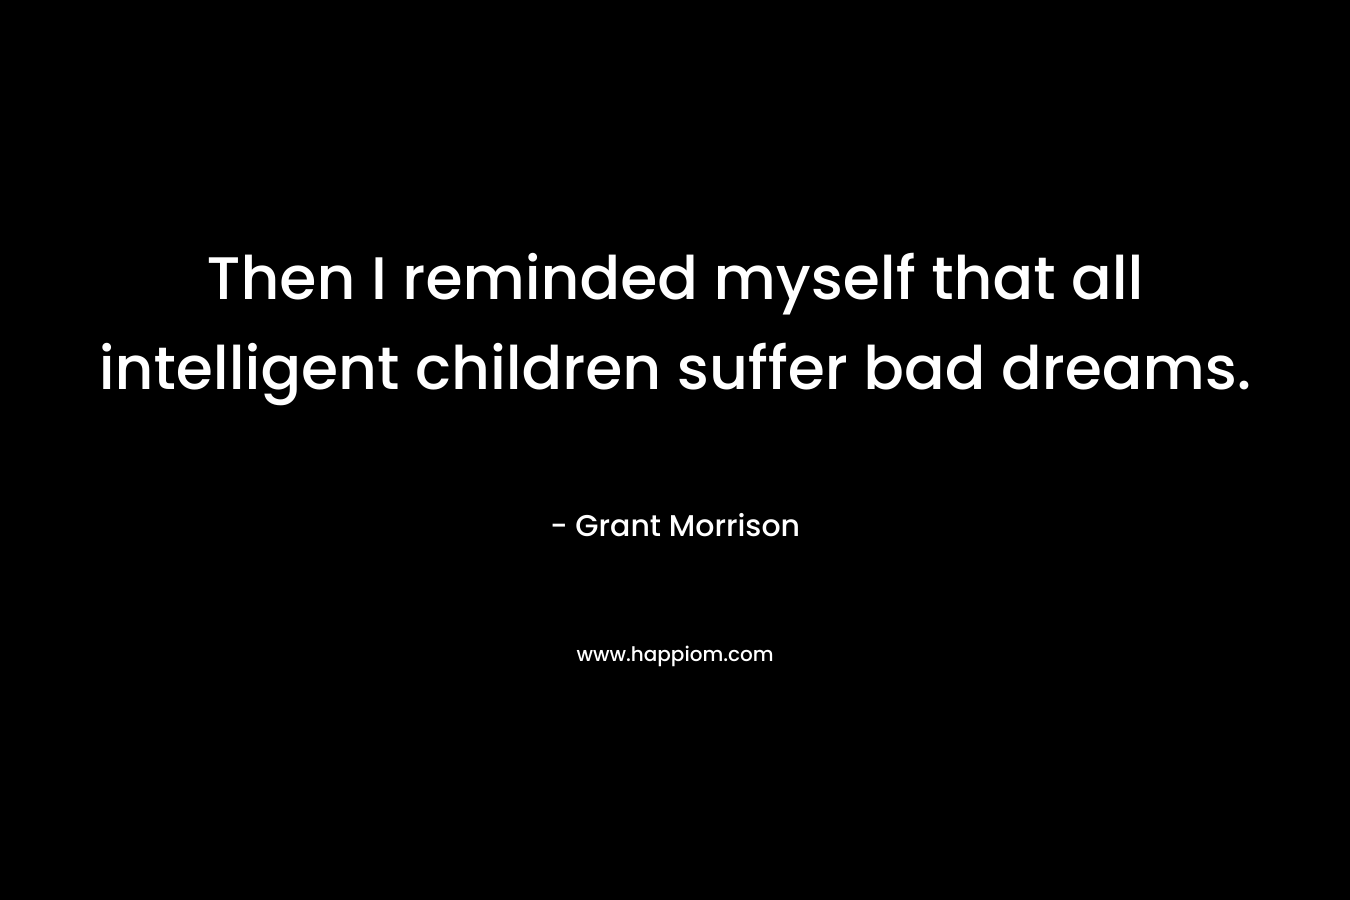 Then I reminded myself that all intelligent children suffer bad dreams. – Grant Morrison